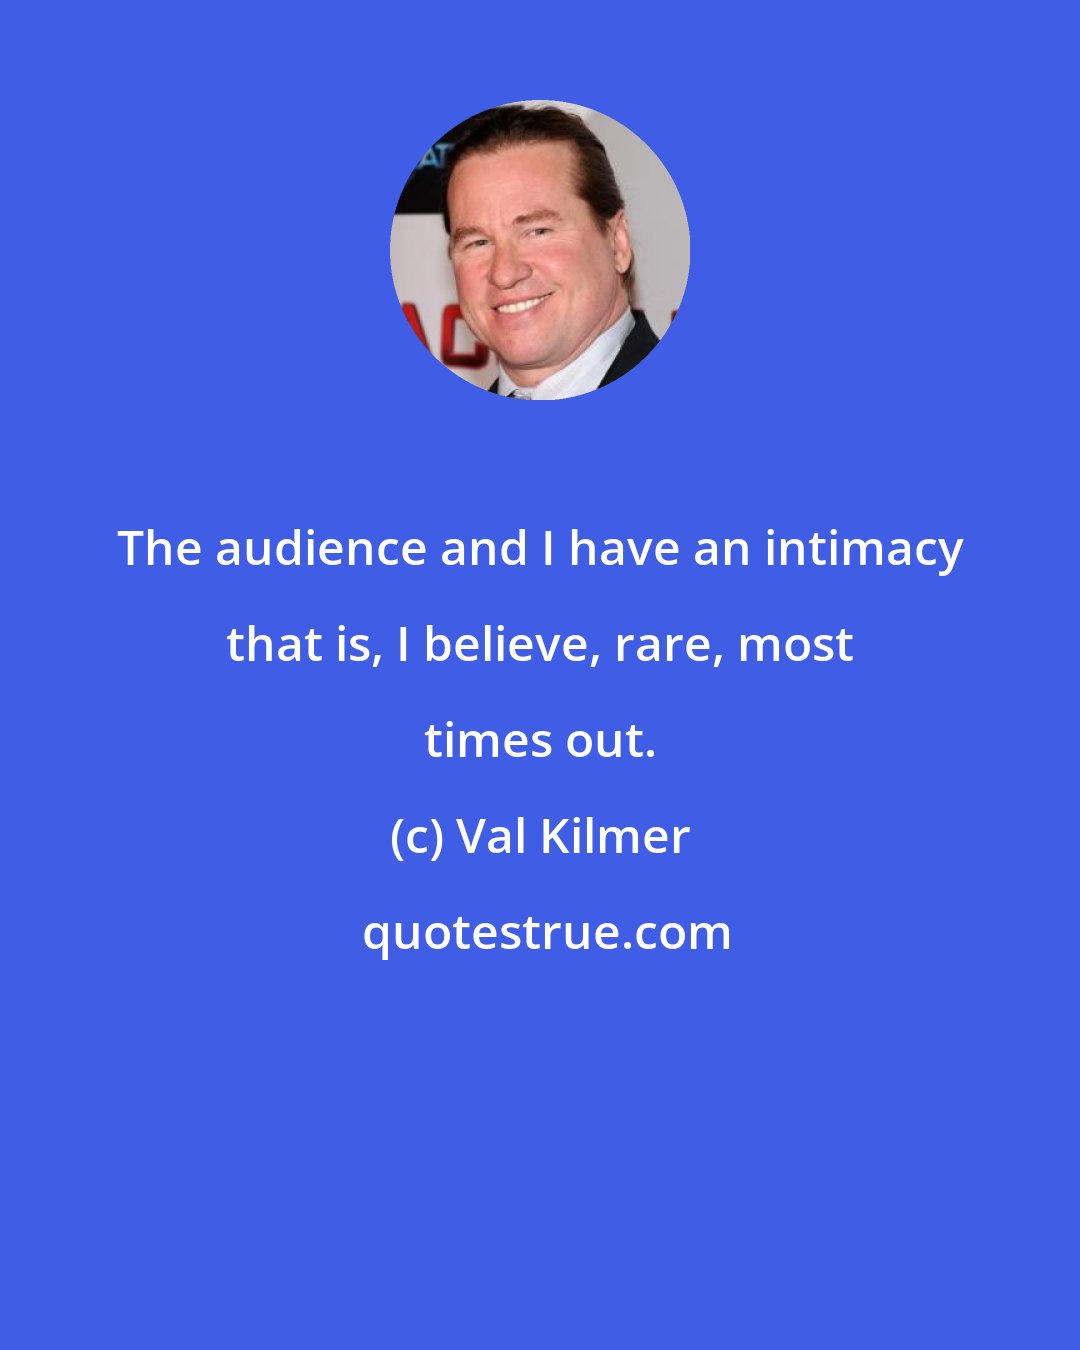 Val Kilmer: The audience and I have an intimacy that is, I believe, rare, most times out.